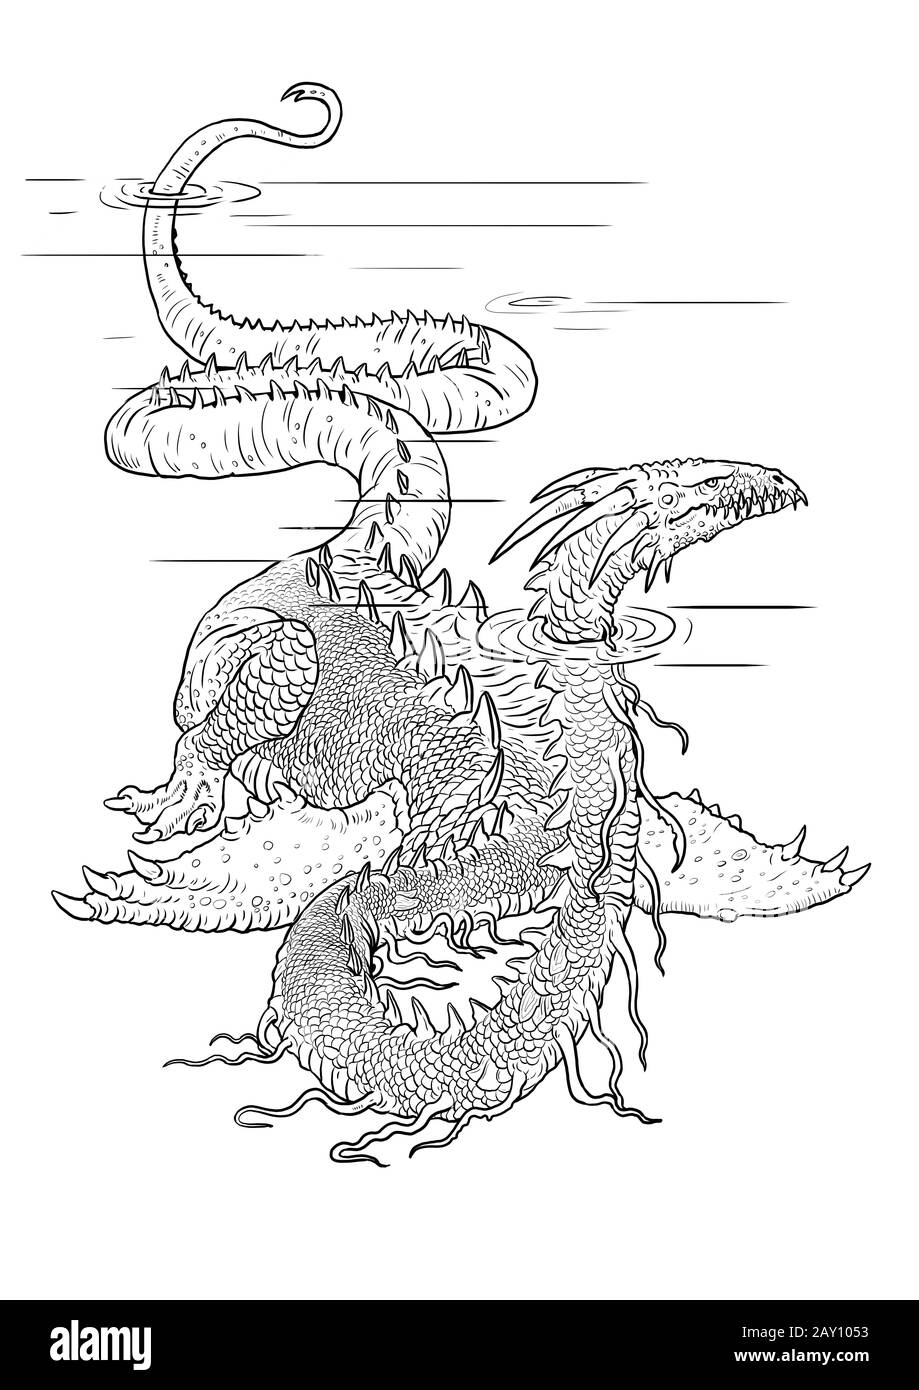 Underwater dragon coloring page. Outline illustration. Dragon drawing coloring sheet. Stock Photo